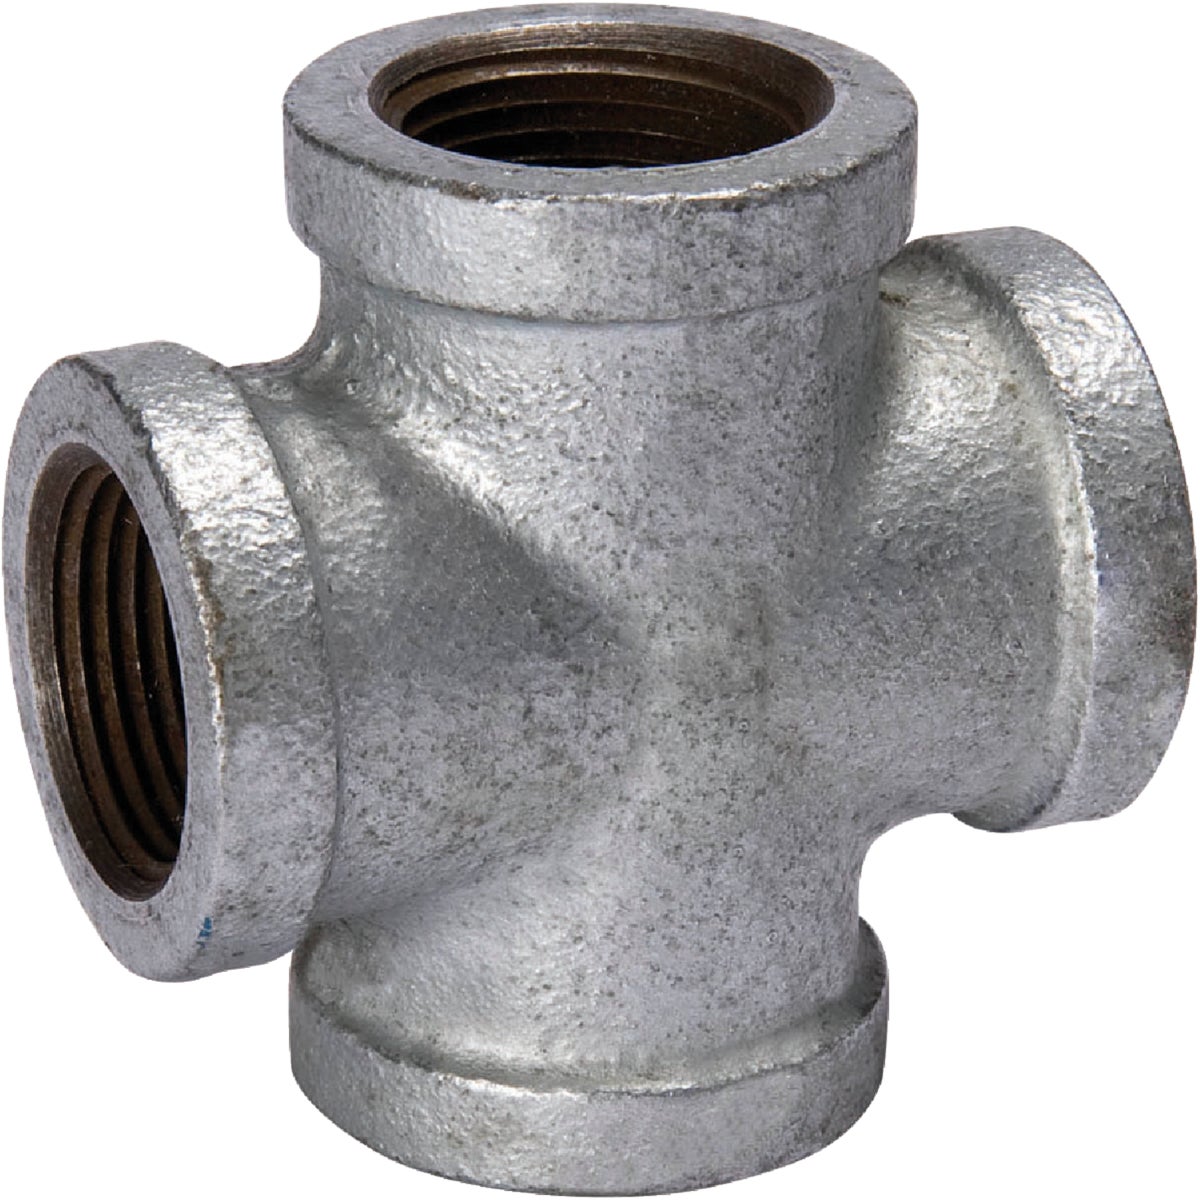 Southland 3/4 In. Malleable Iron Galvanized Pipe Cross